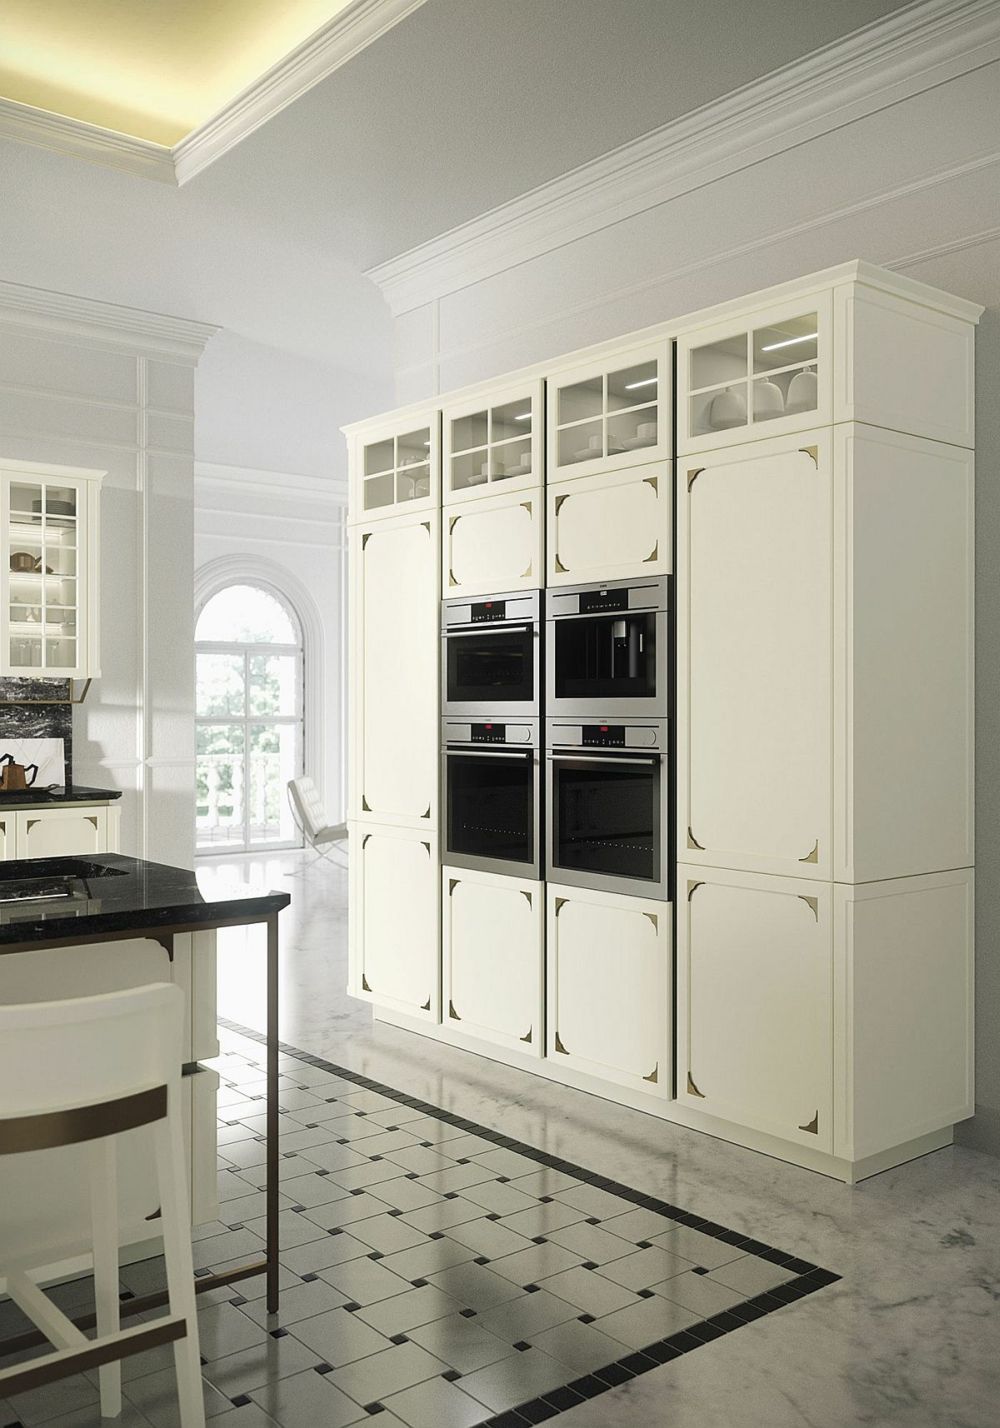 The symmetrical cabinets have a calming effect